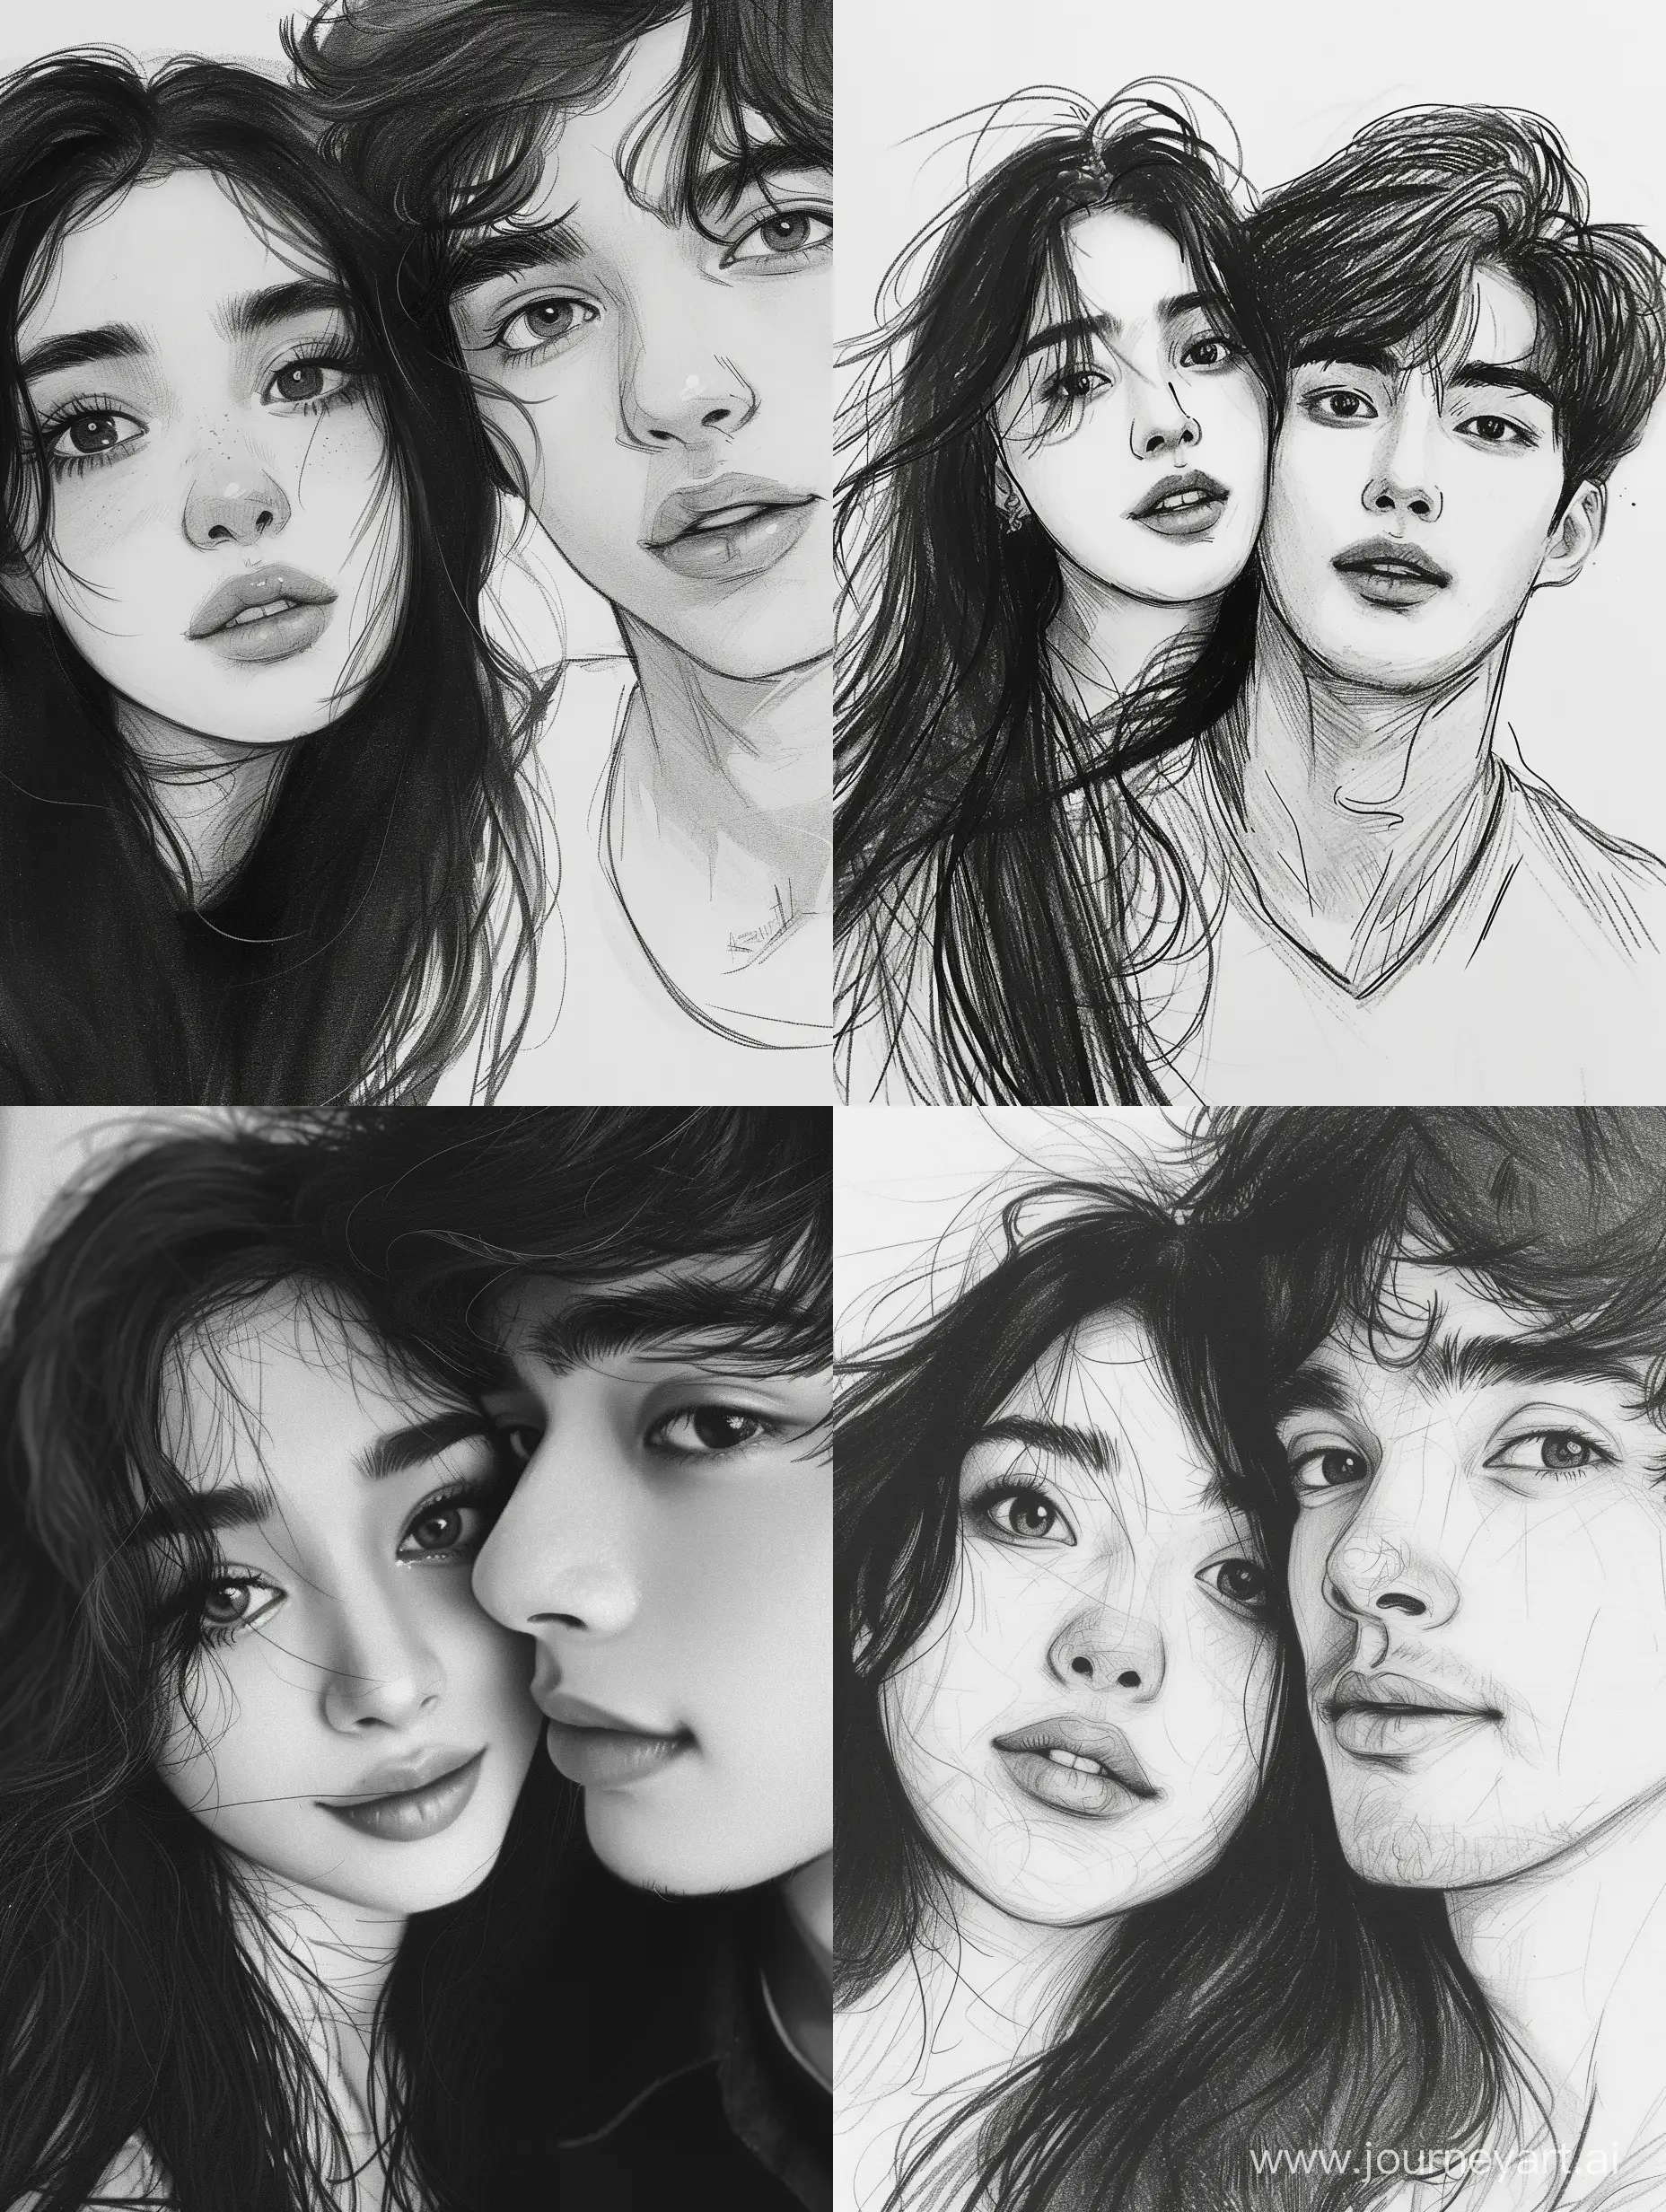 an asian couple, sketched drawing, matisse style, the girl  Bangladeshi has beautiful eyes and her hair is long length, her hair is black and cool style, her nose is short and little wide, wide lips, the boy has Bangladeshi hairstyle, very handsome, in 4k quality, girl is cute vibes with sexy eyes and beautiful